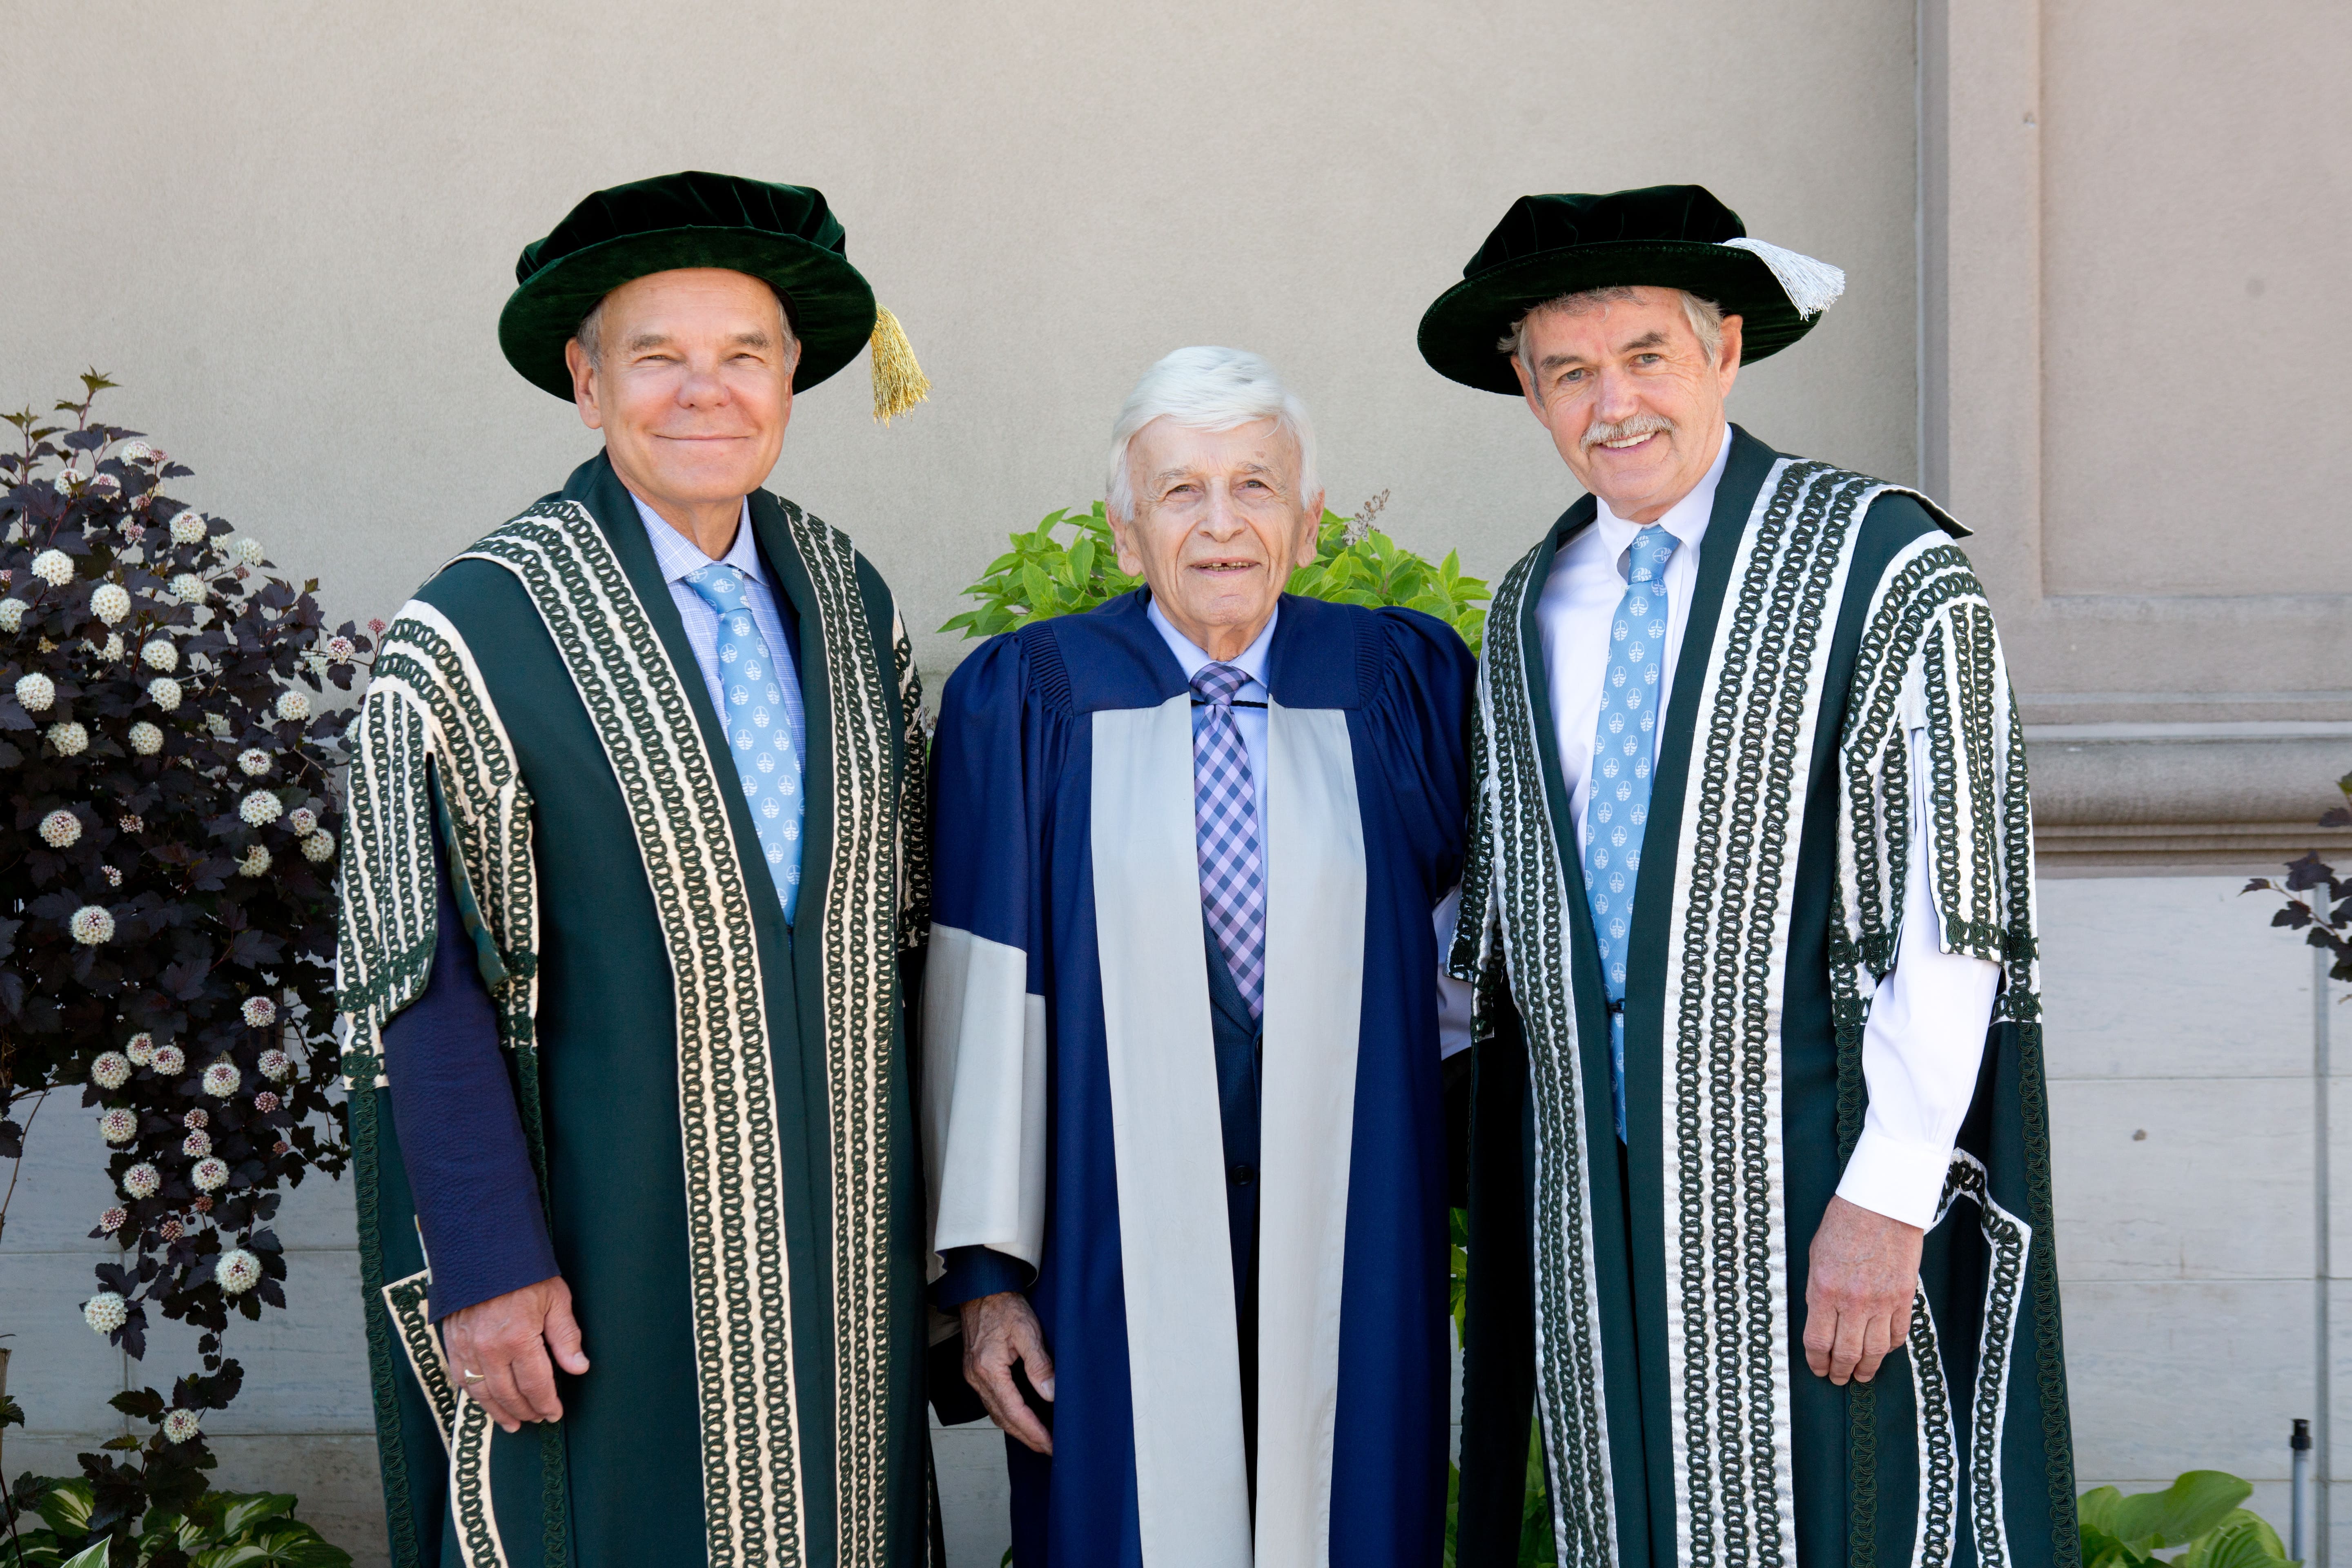 Chancellor Don Tapscott poses for a photo with Max Eisen and President and Vice-Chancellor Leo Groarke